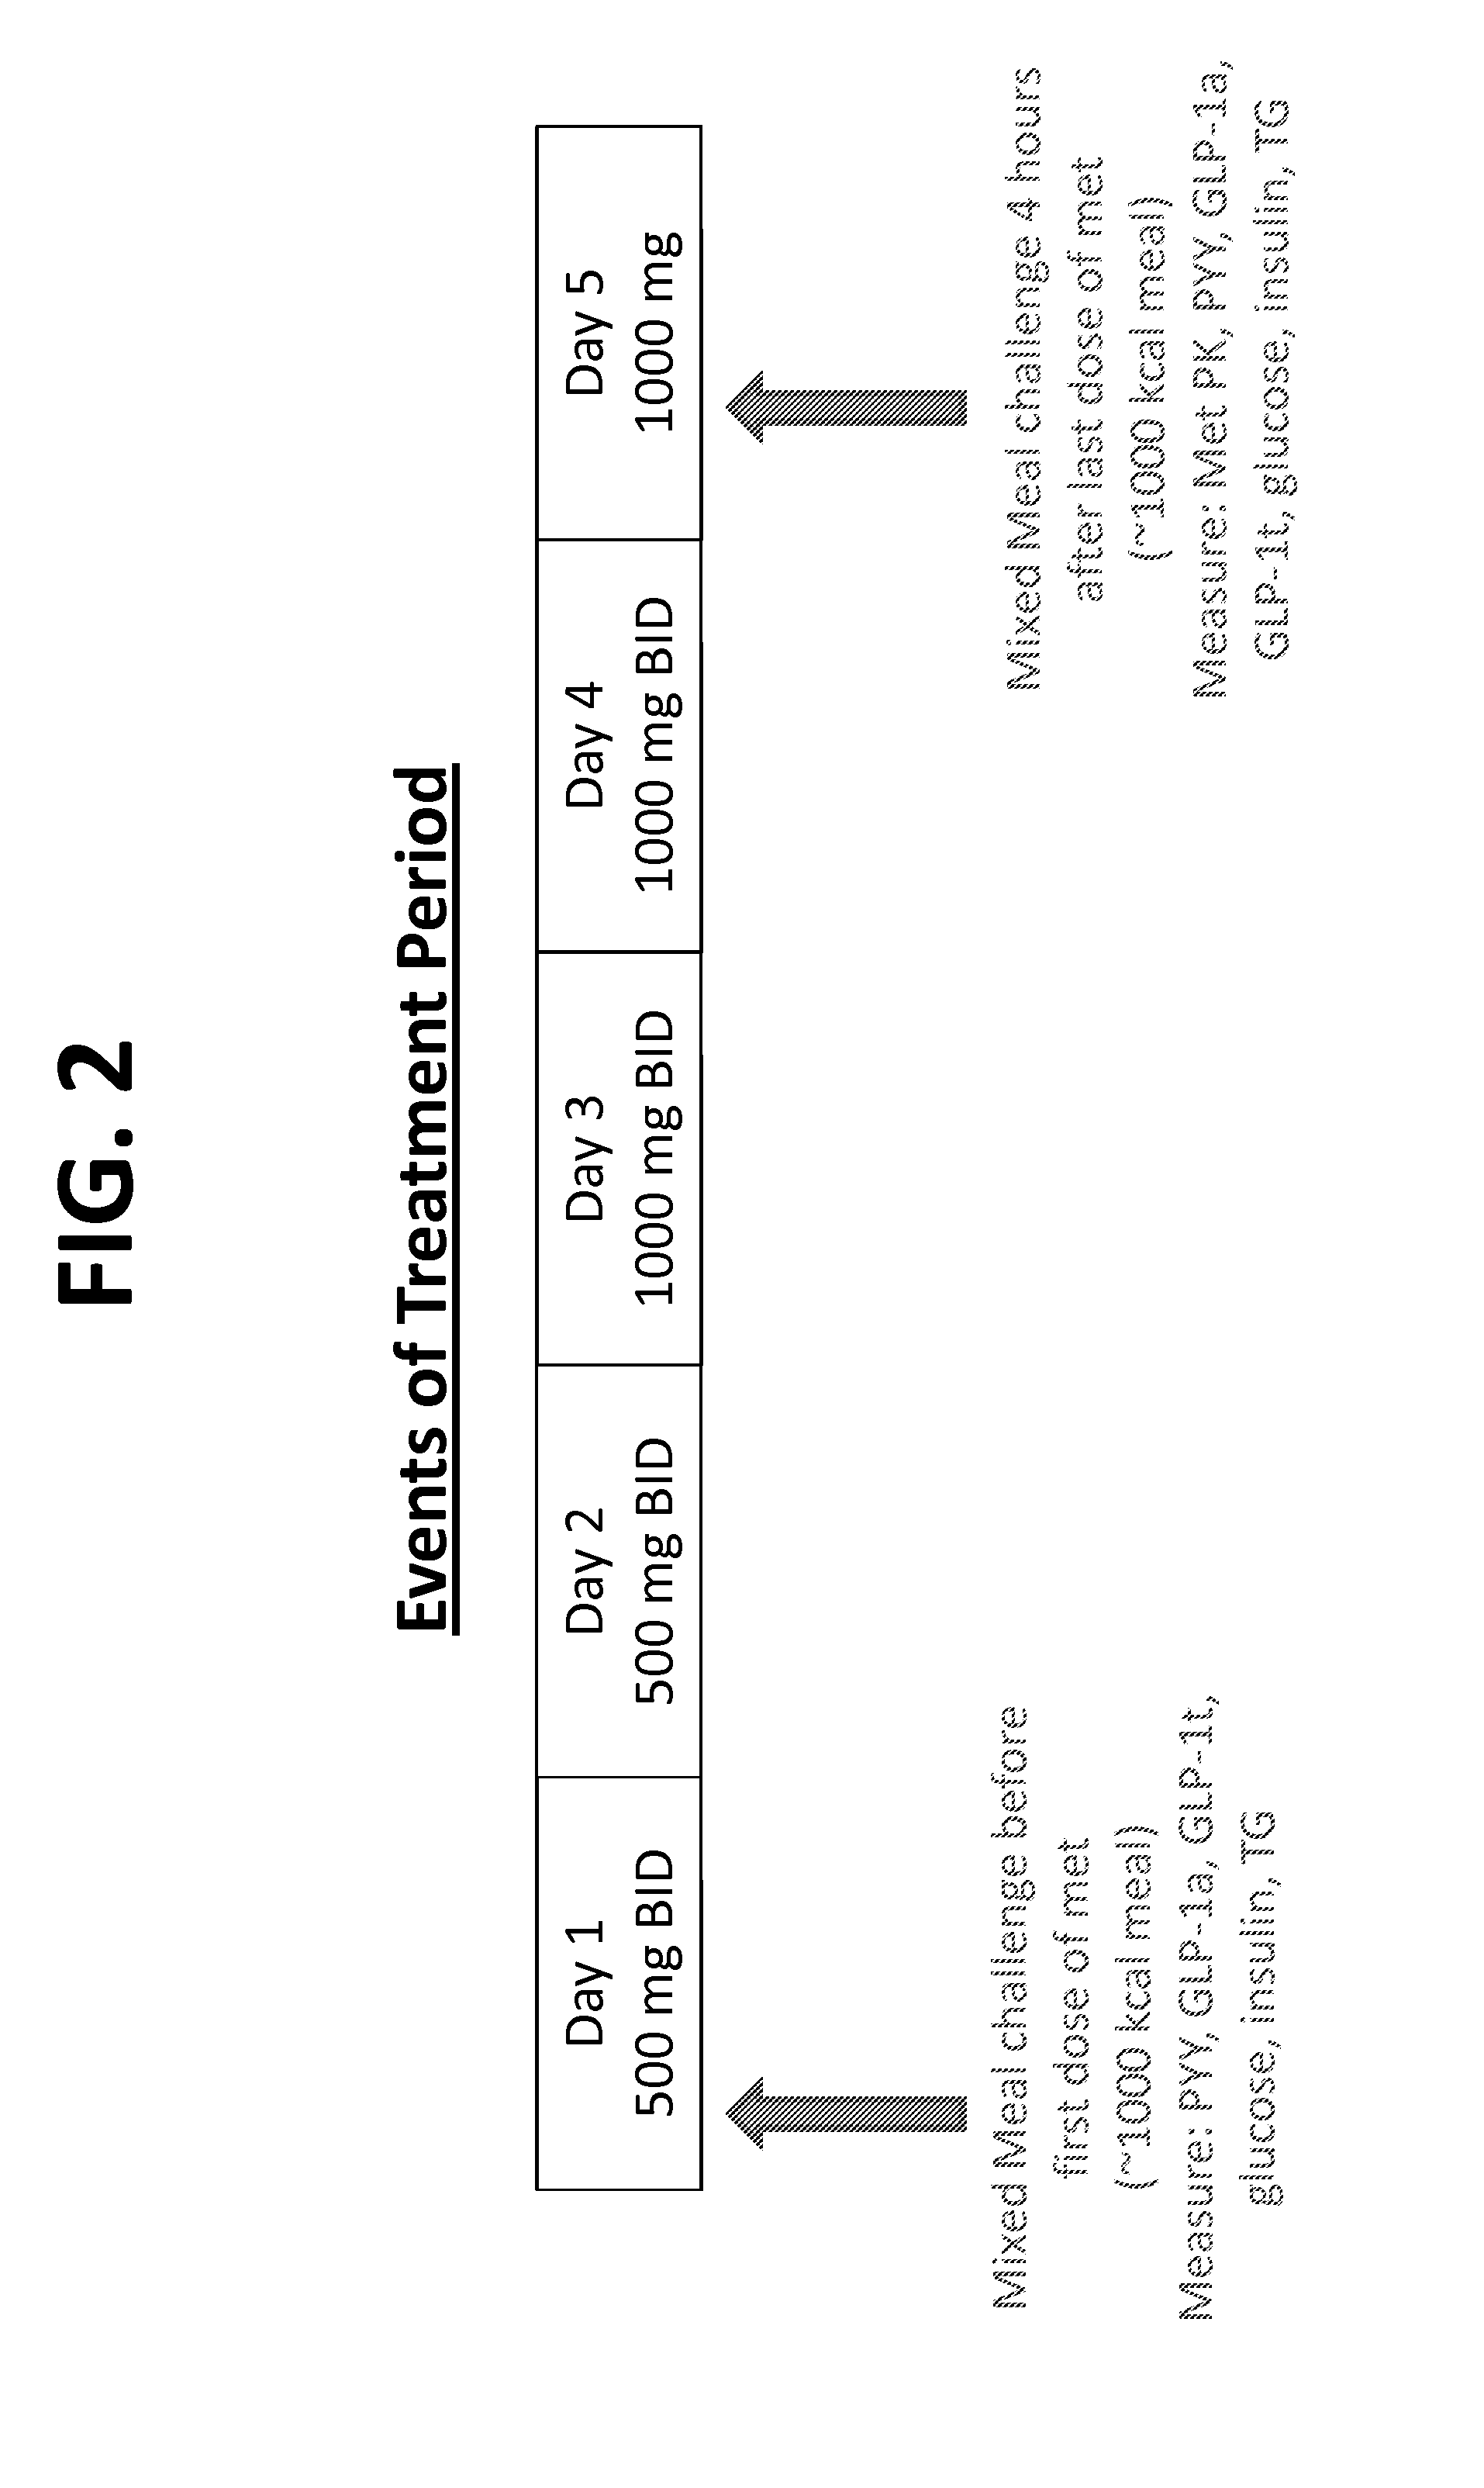 Compositions Comprising Statins, Biguanides and Further Agents for Reducing Cardiometabolic Risk